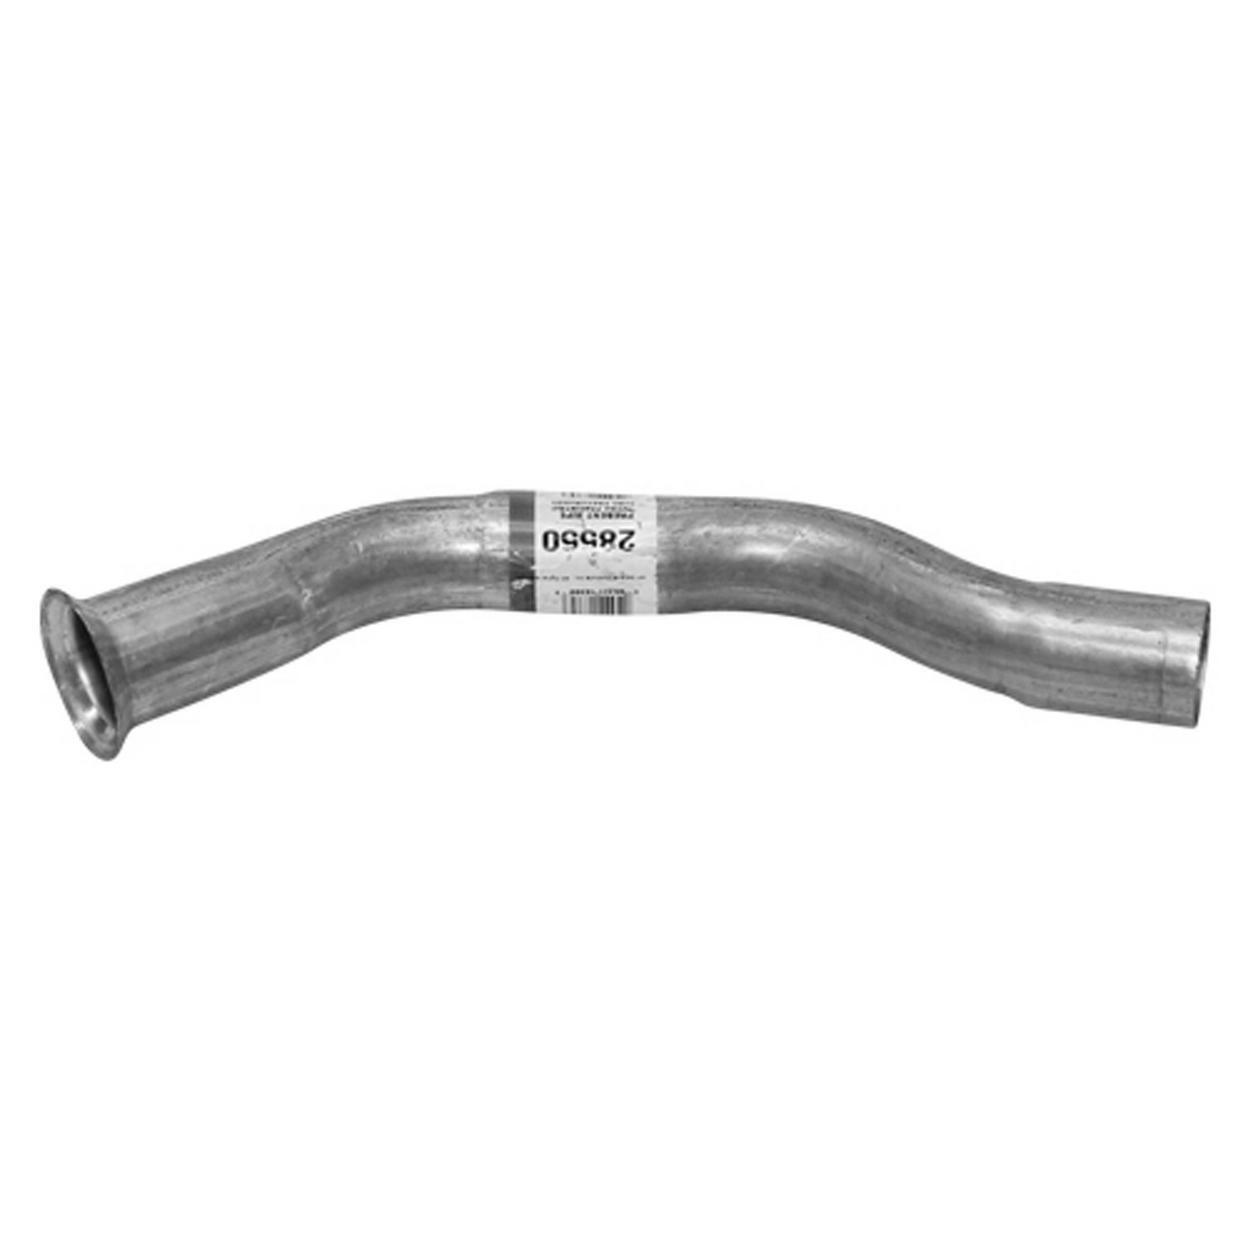 28550-AE Exhaust Pipe Fits 1996-1999 Toyota Paseo